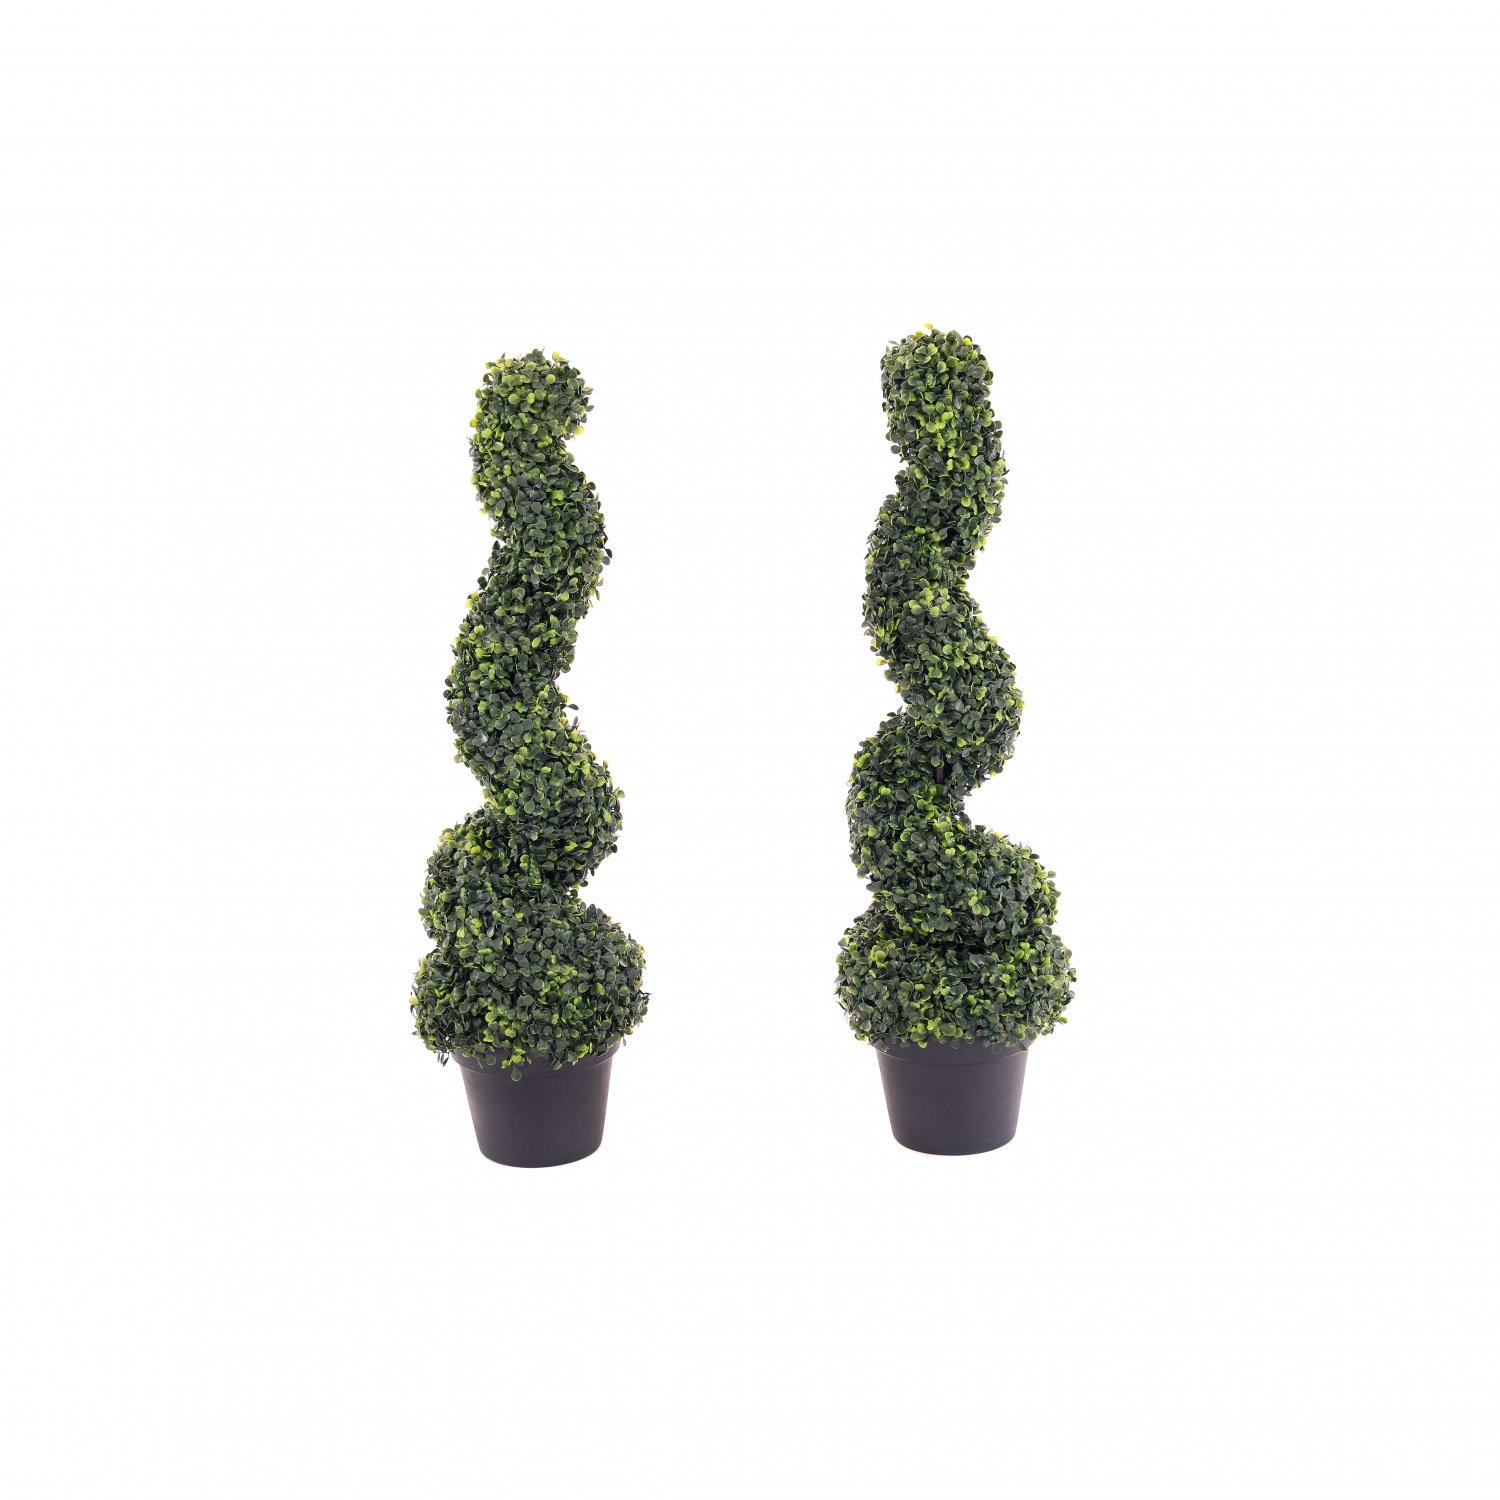 Set of 2 Artificial Topiary Boxwood Spiral Trees 80cm Indoor Out